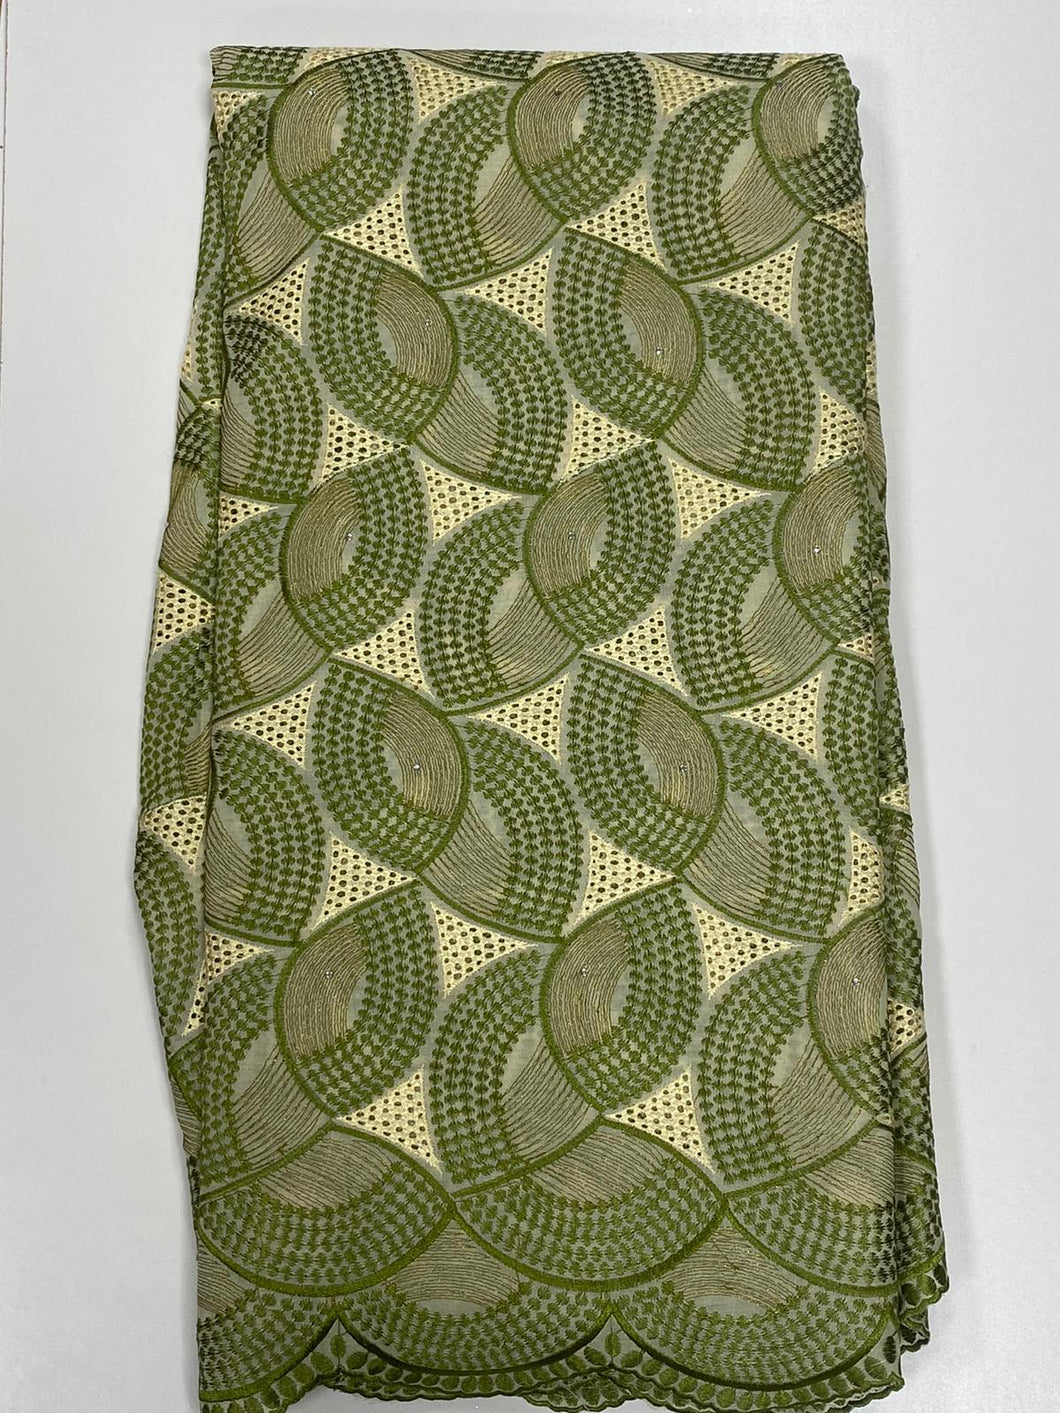 Olive Green Cord Lace - 5 Yards